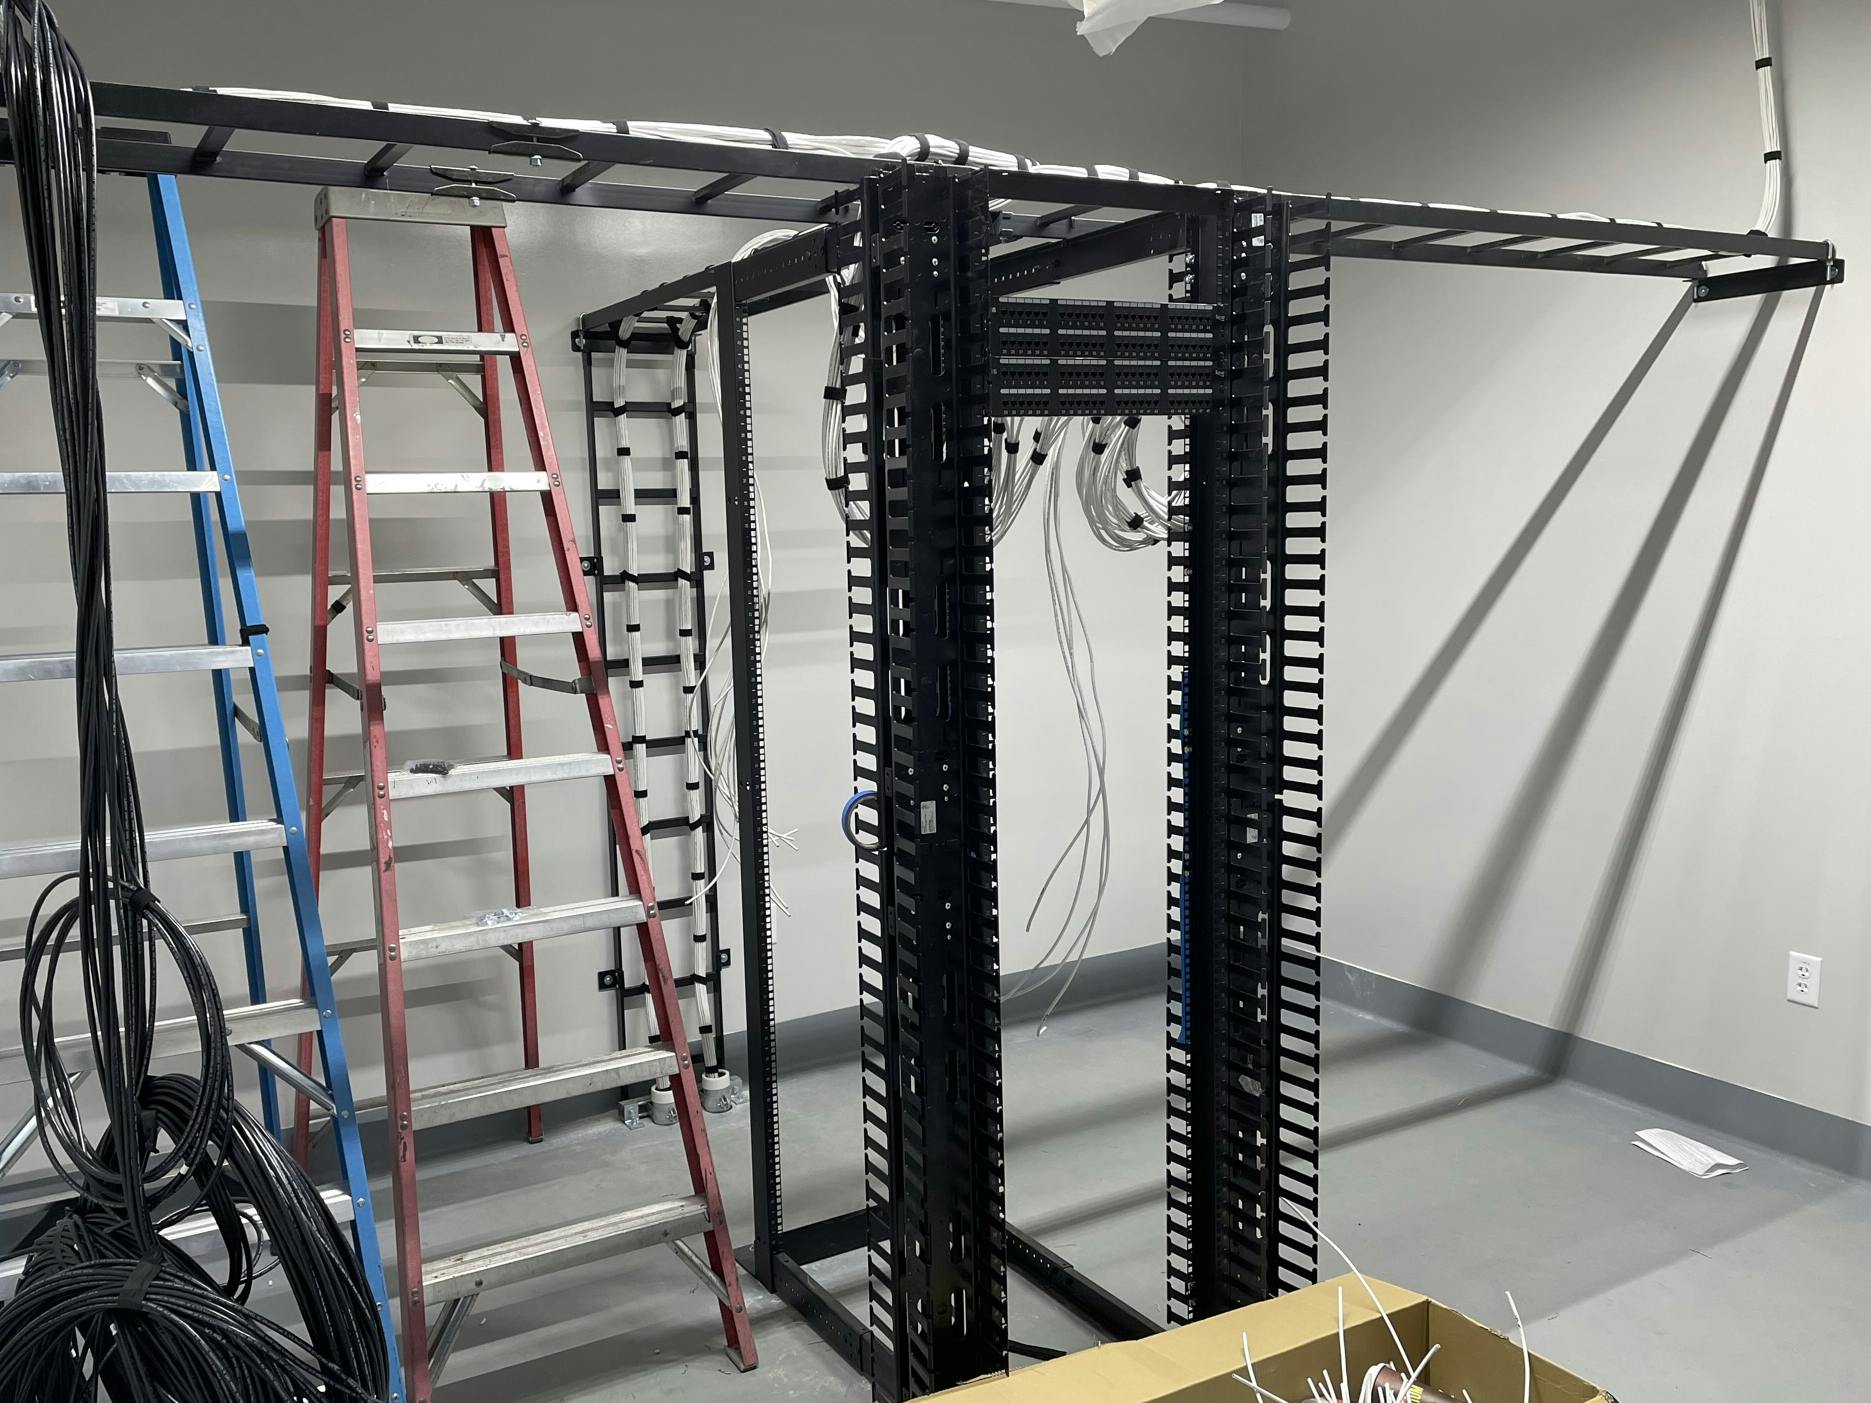 cables and a server rack cabled and ready for equipment to be installed